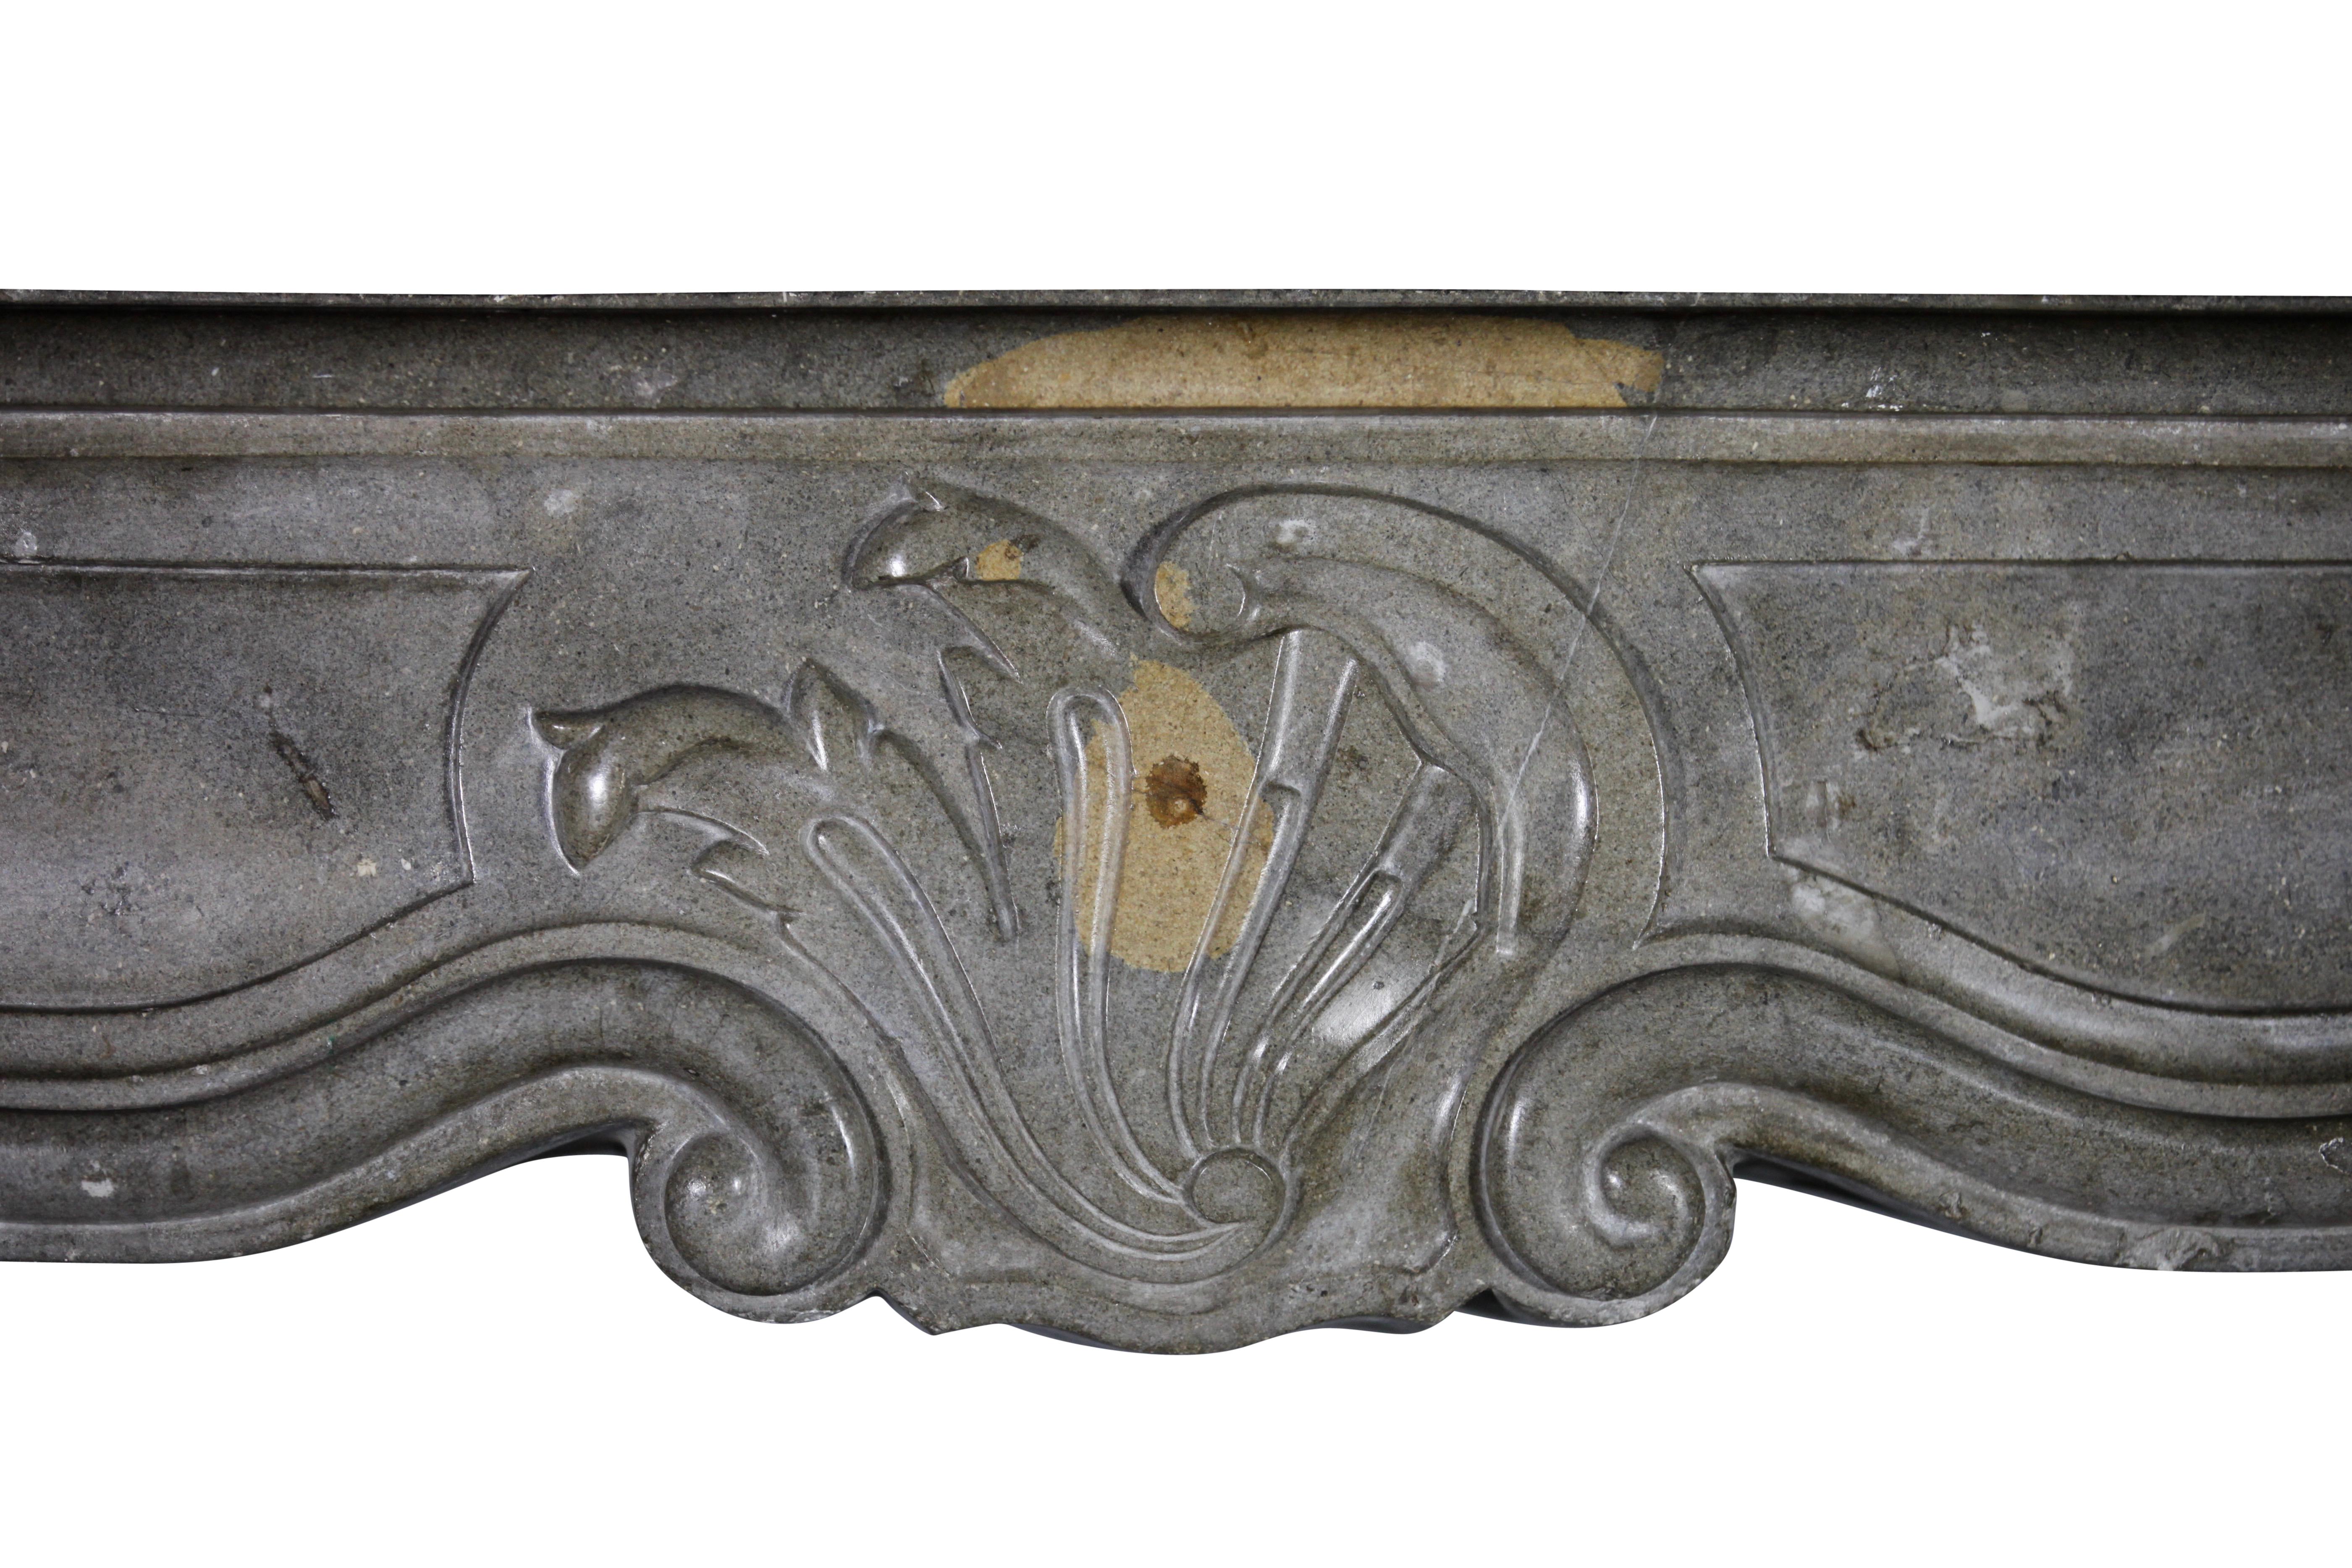 This is a original antique fine French Regency fireplace surround in a burgundy bicolor marble hard stone. This is a grand antique fireplace mantel.
Measures:
181 cm EW 71.25